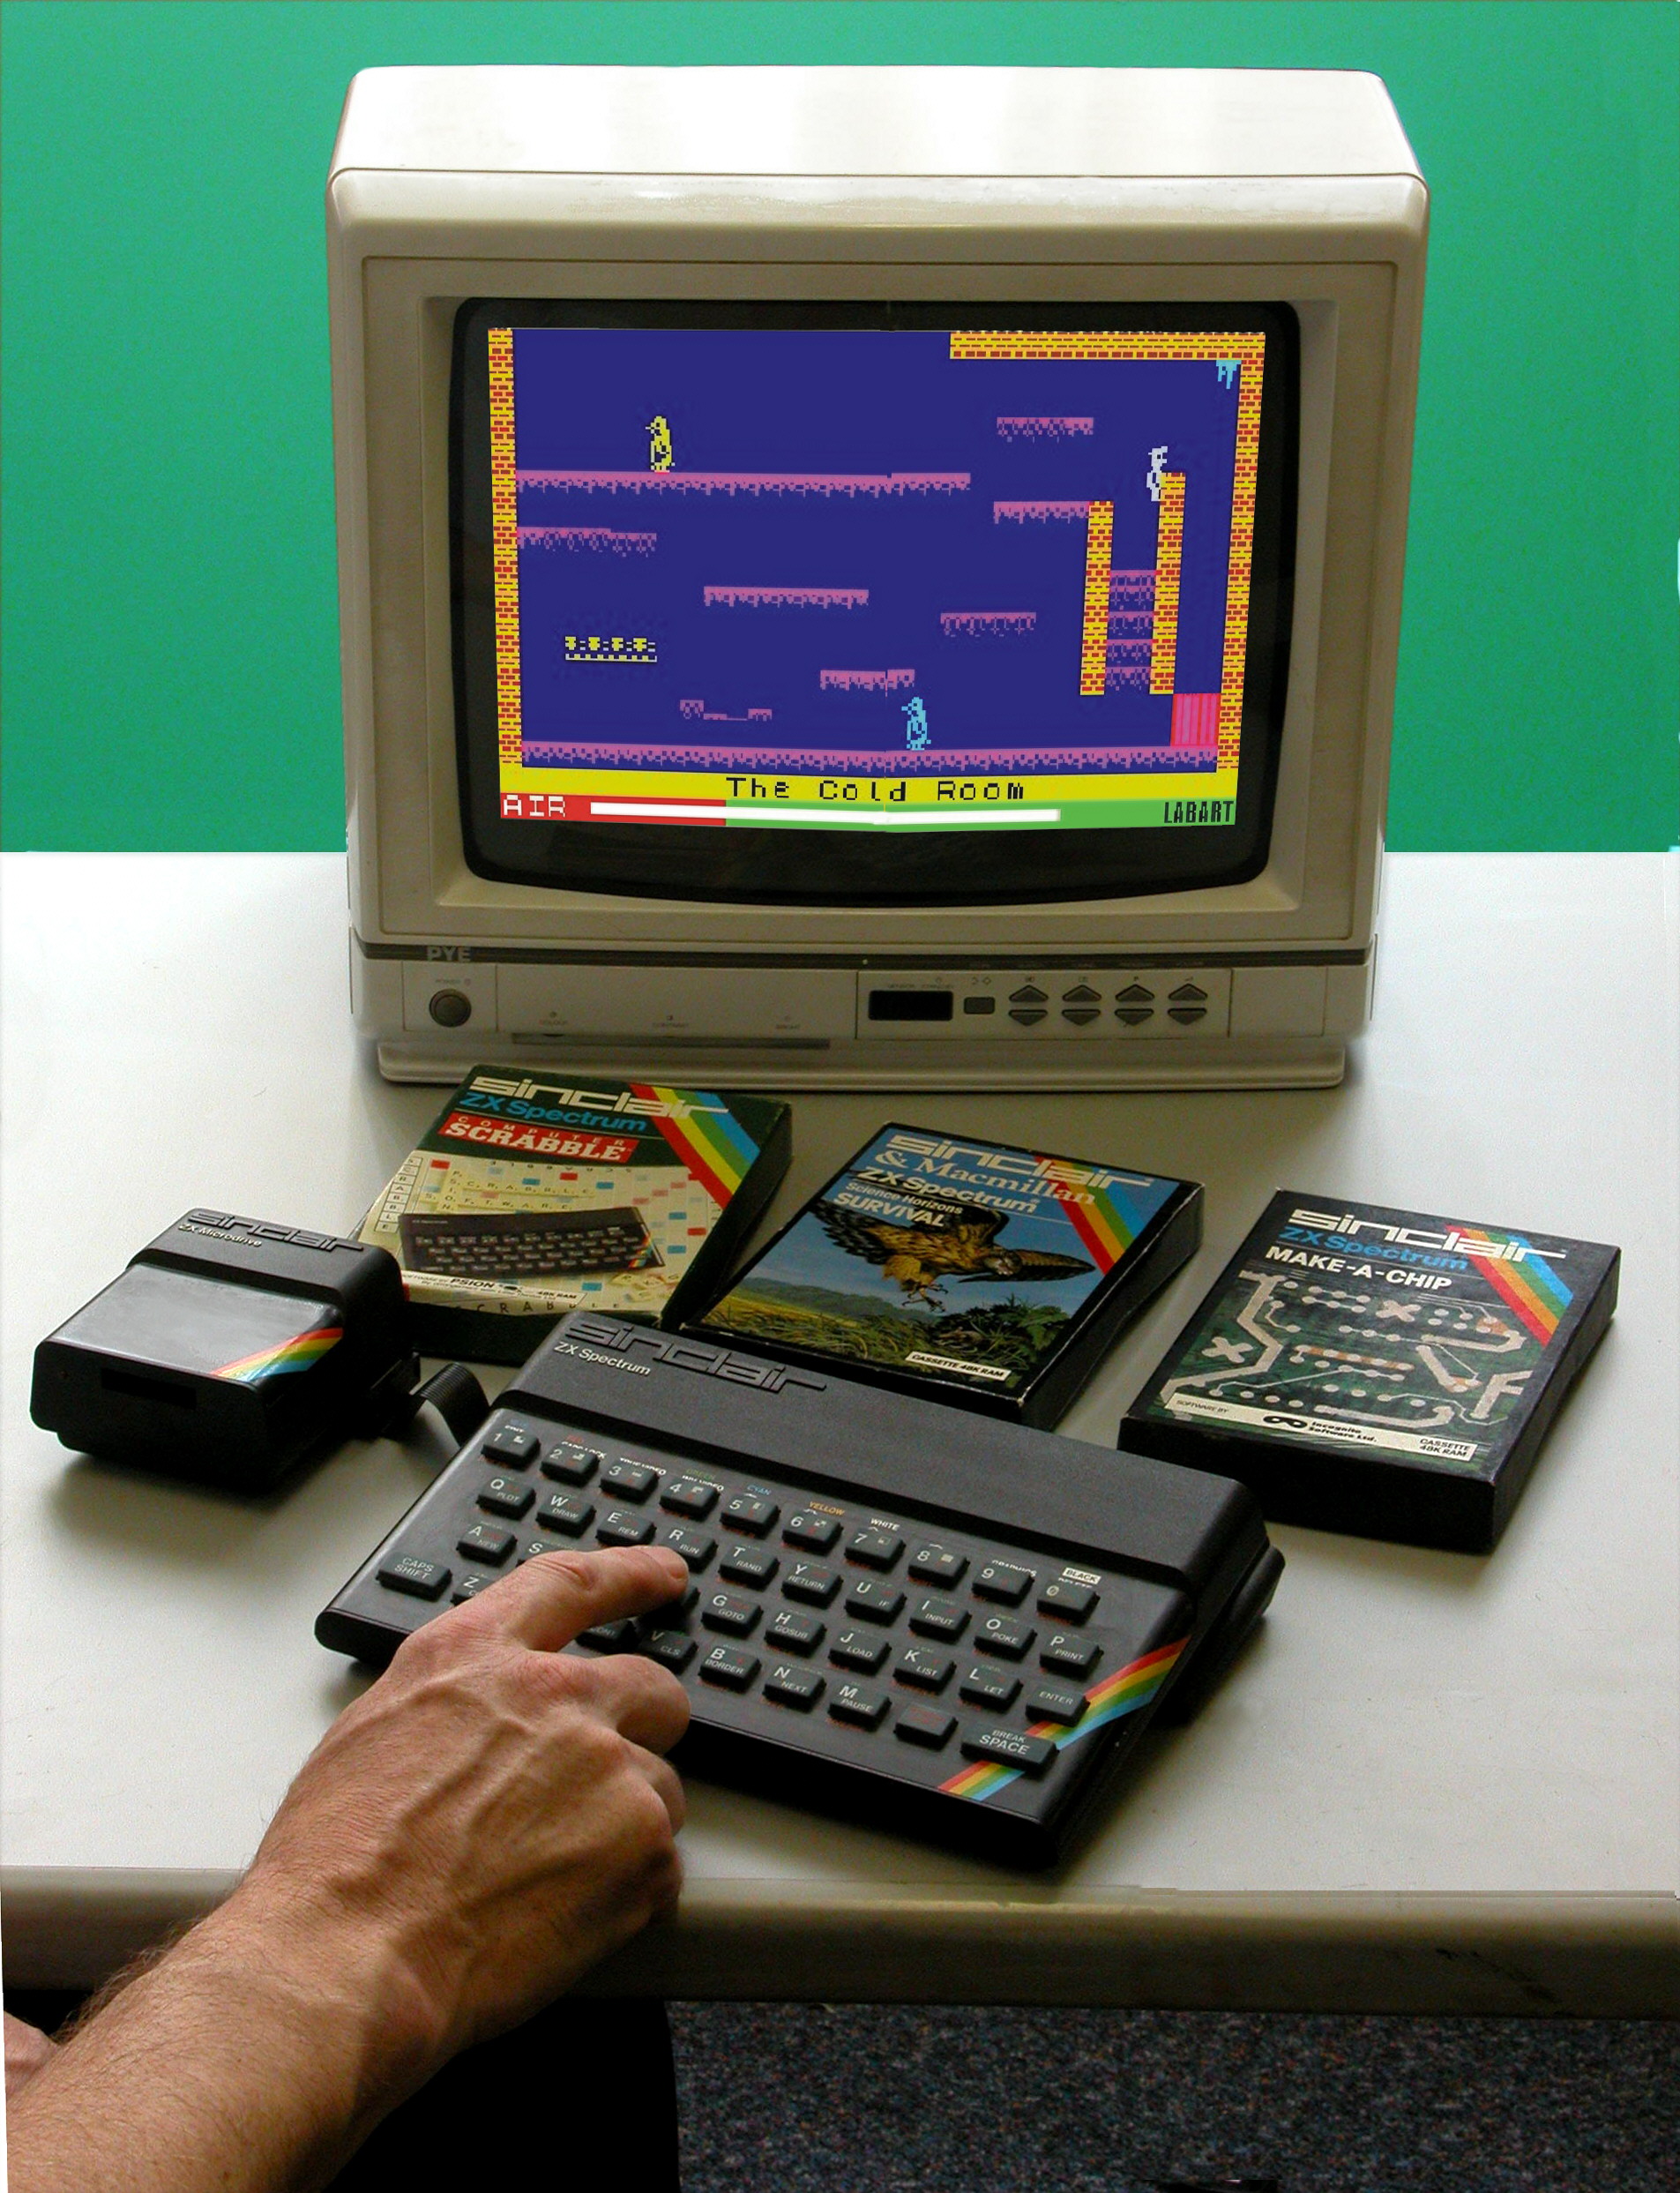 Jeremy Holt: The Museum of Computing